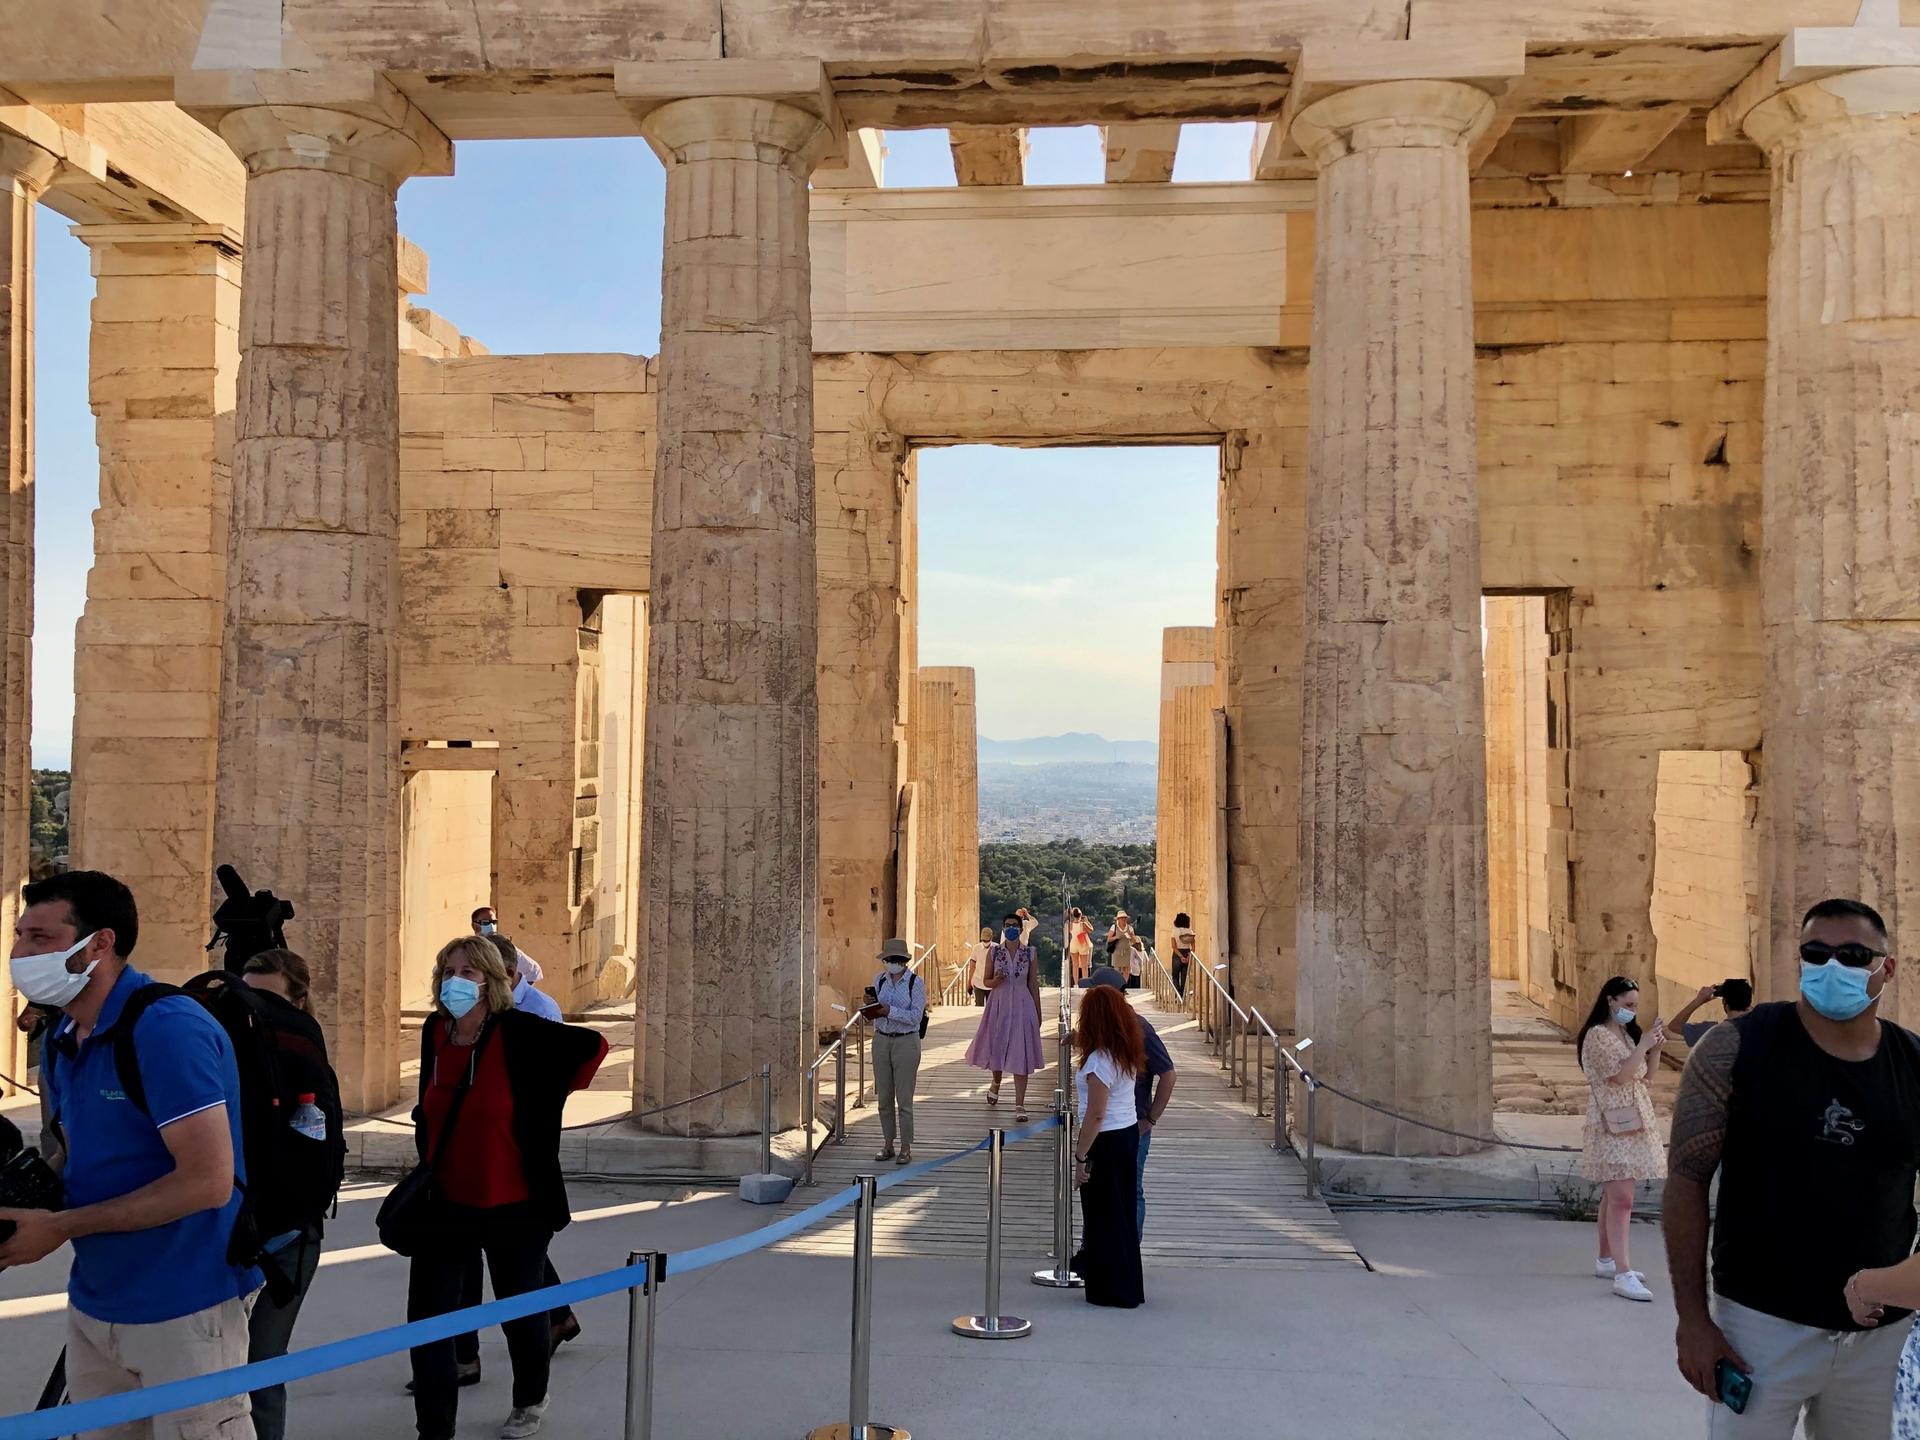 The Acropolis is one of the country’s most treasured and often-visited archeological sites, welcoming more than 3 million visitors annually in prepandemic times.